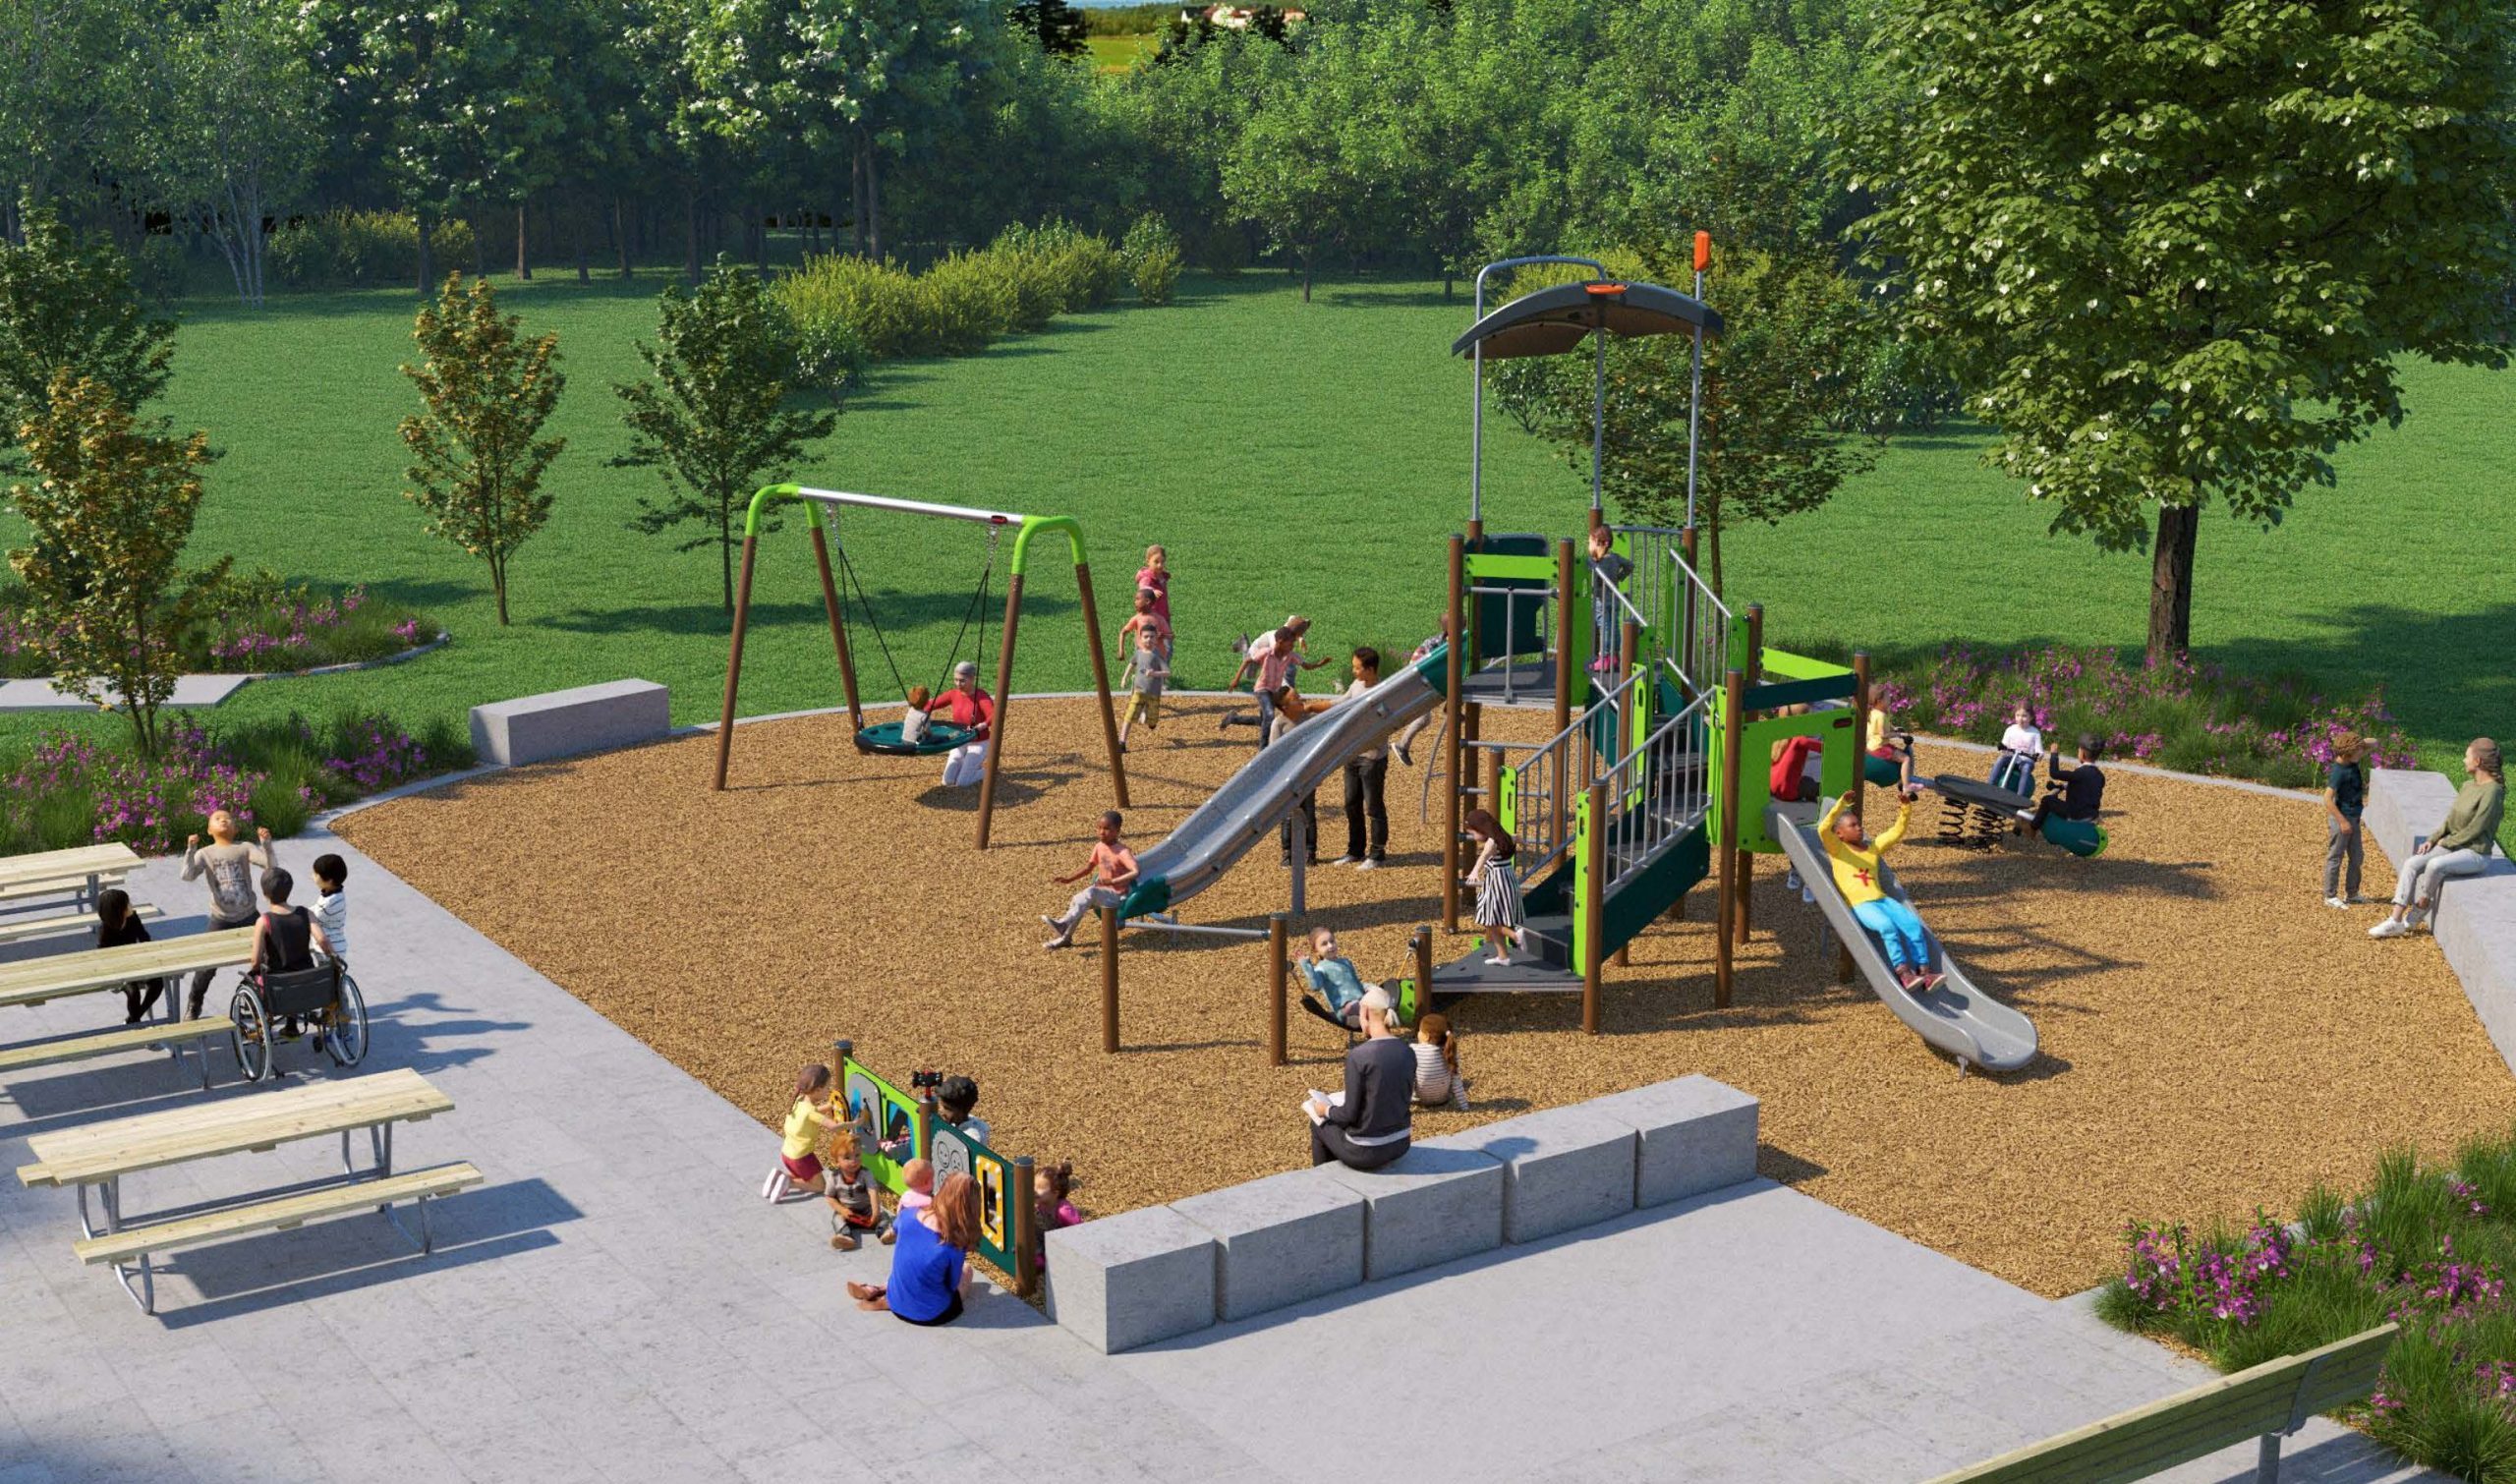 Artistic rendering of playground from birds eye view.